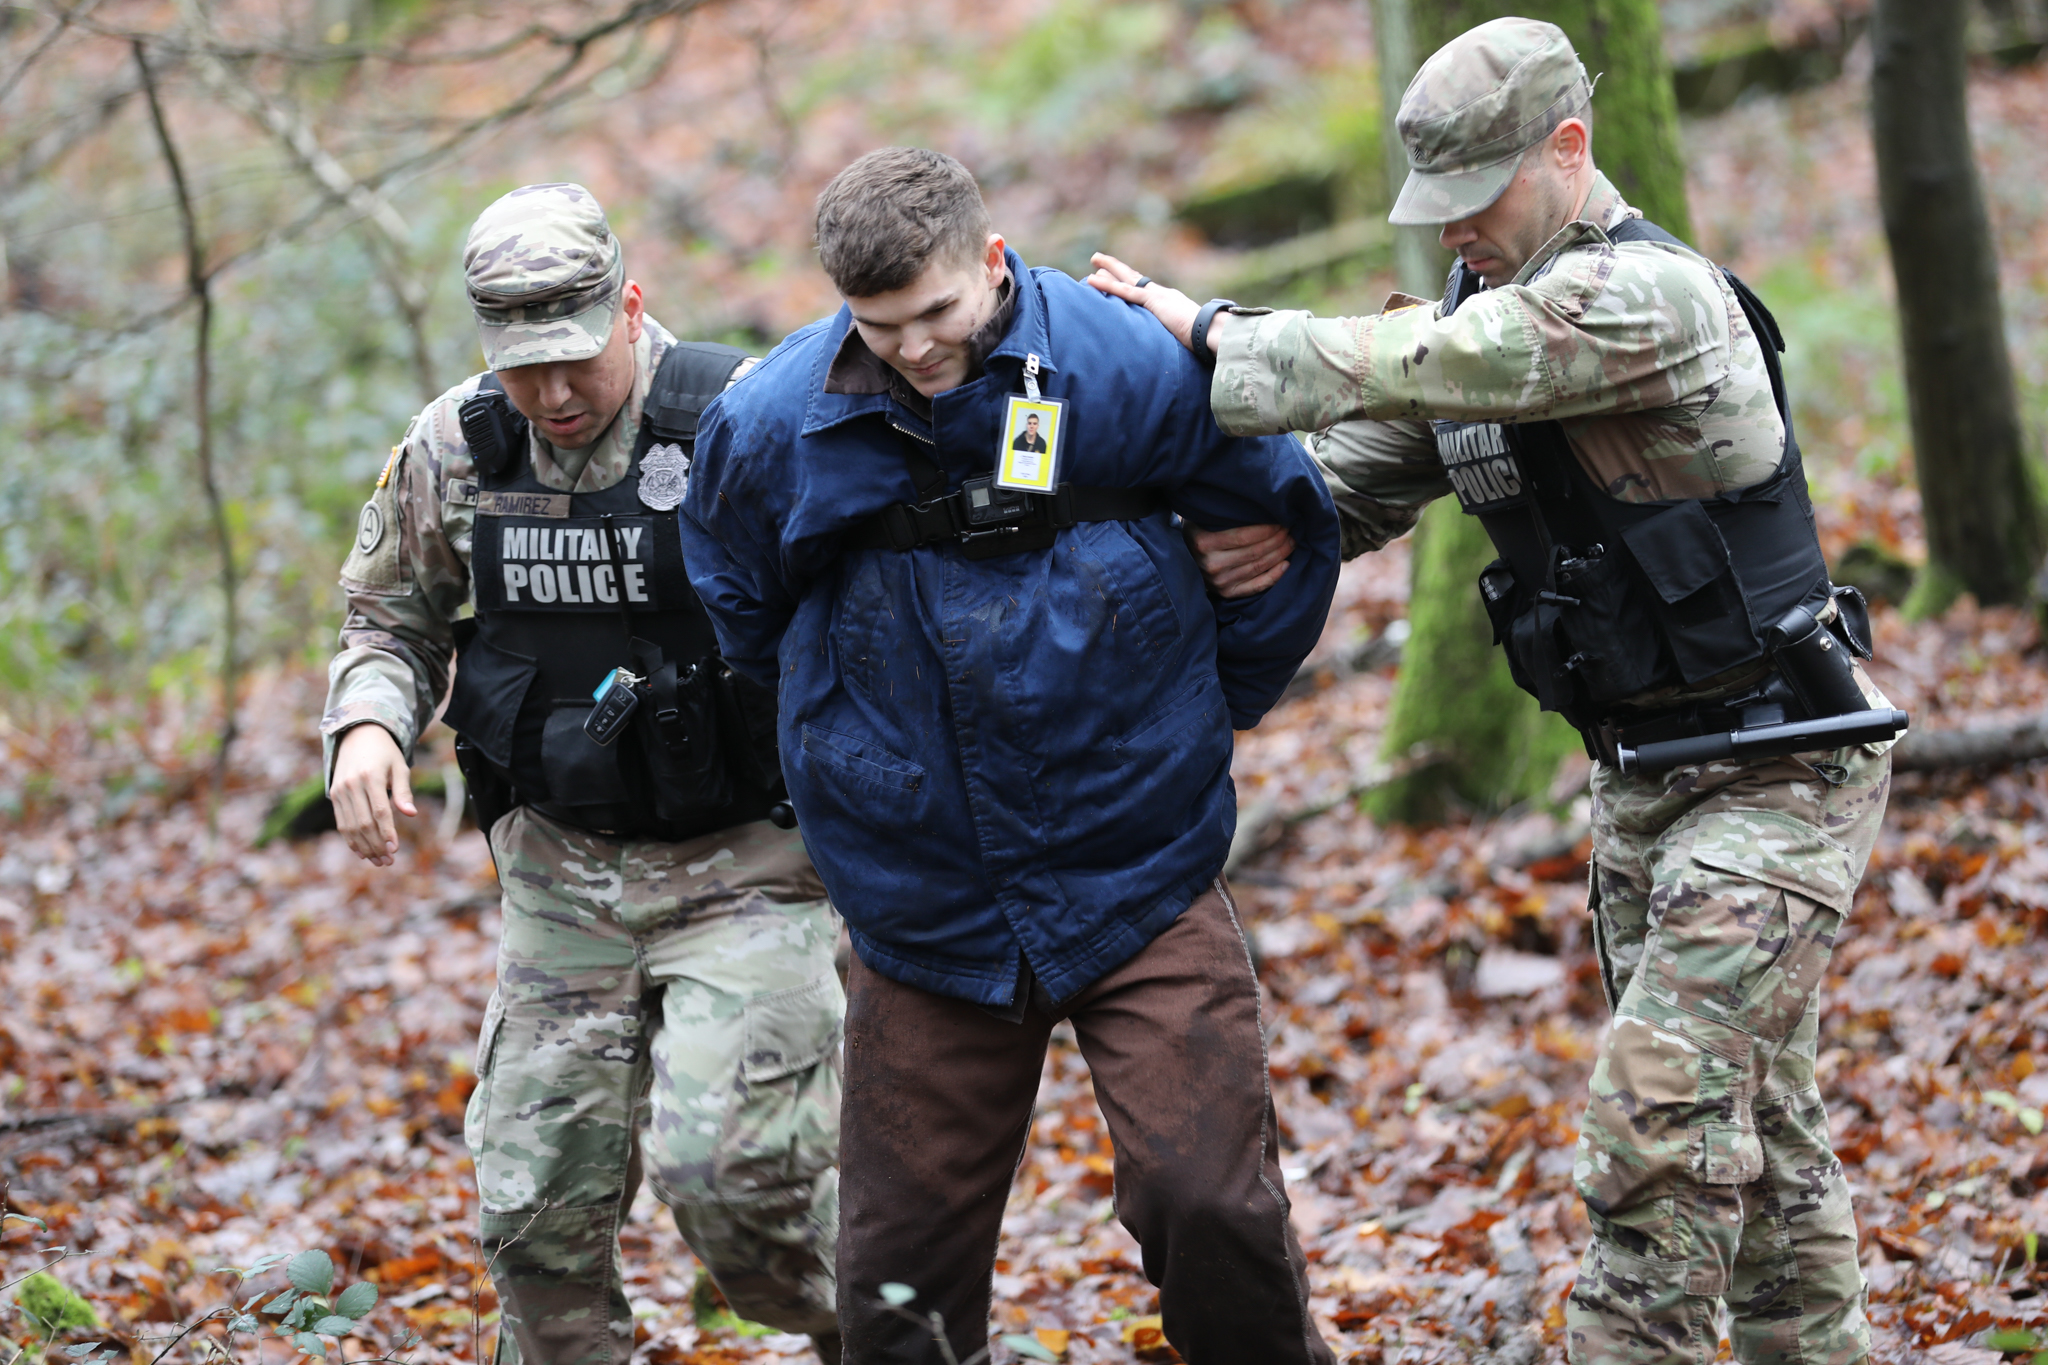 Sgt. Alexander Farnum and Staff Sgt. Renaldo Rameriez, with the 92nd Military Police Company “Rock Solid”, arrest and escort the captured escapee back towards the waiting MP vehicle during a missing prisoner emergency action plan exercise on Sembach Kaserne, Germany, on Dec. 14, 2023. The exercise was used to highlight the readiness of the facility’s military and partner organizations in the event a prisoner escapes custody.